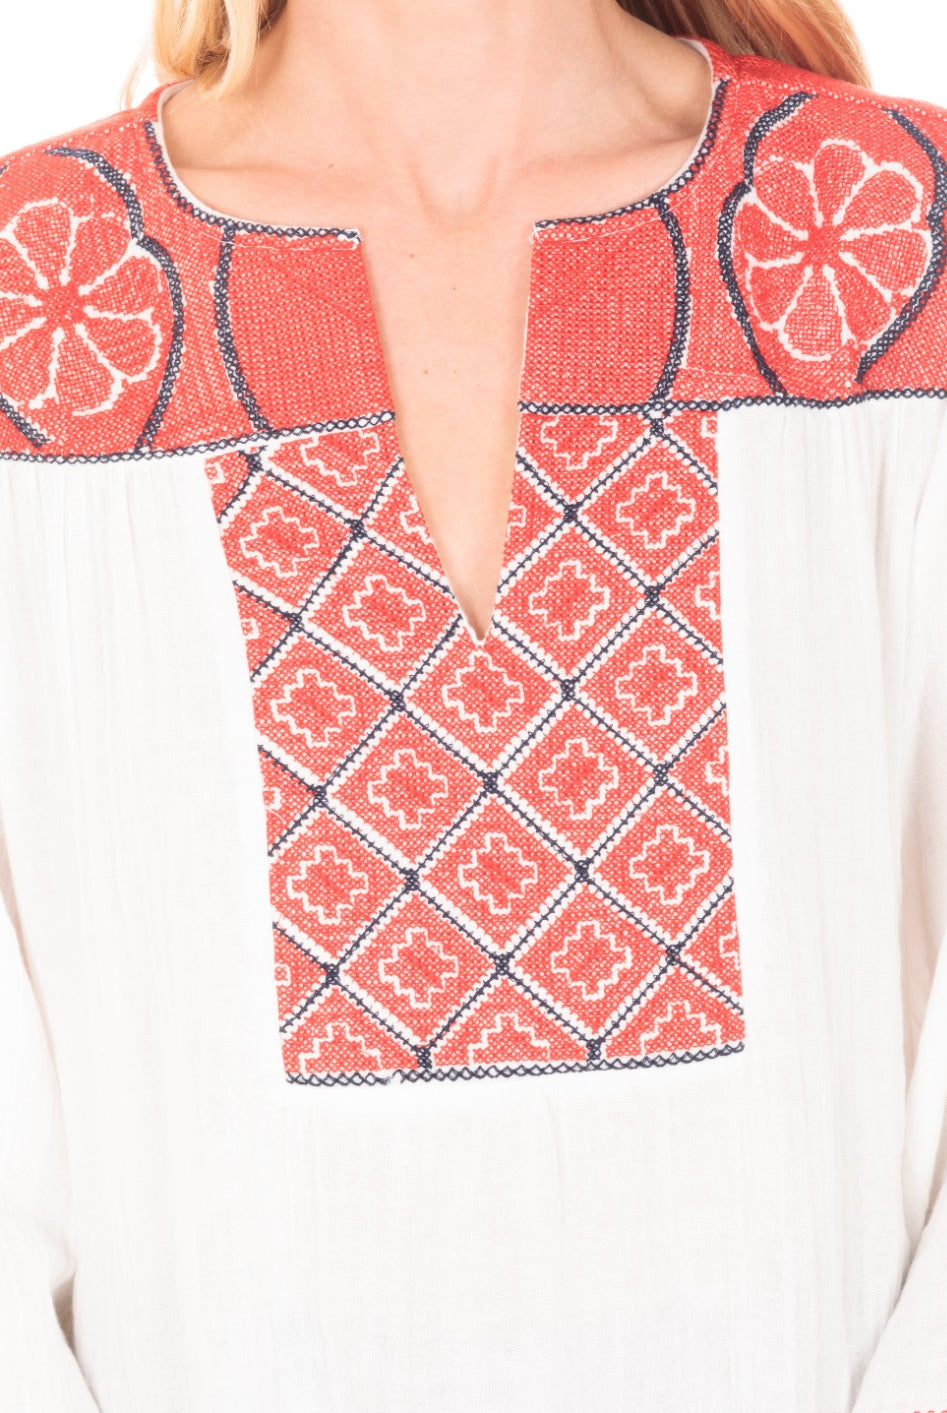 Pull/Over With Red Medallion Embroidery Neck APNY